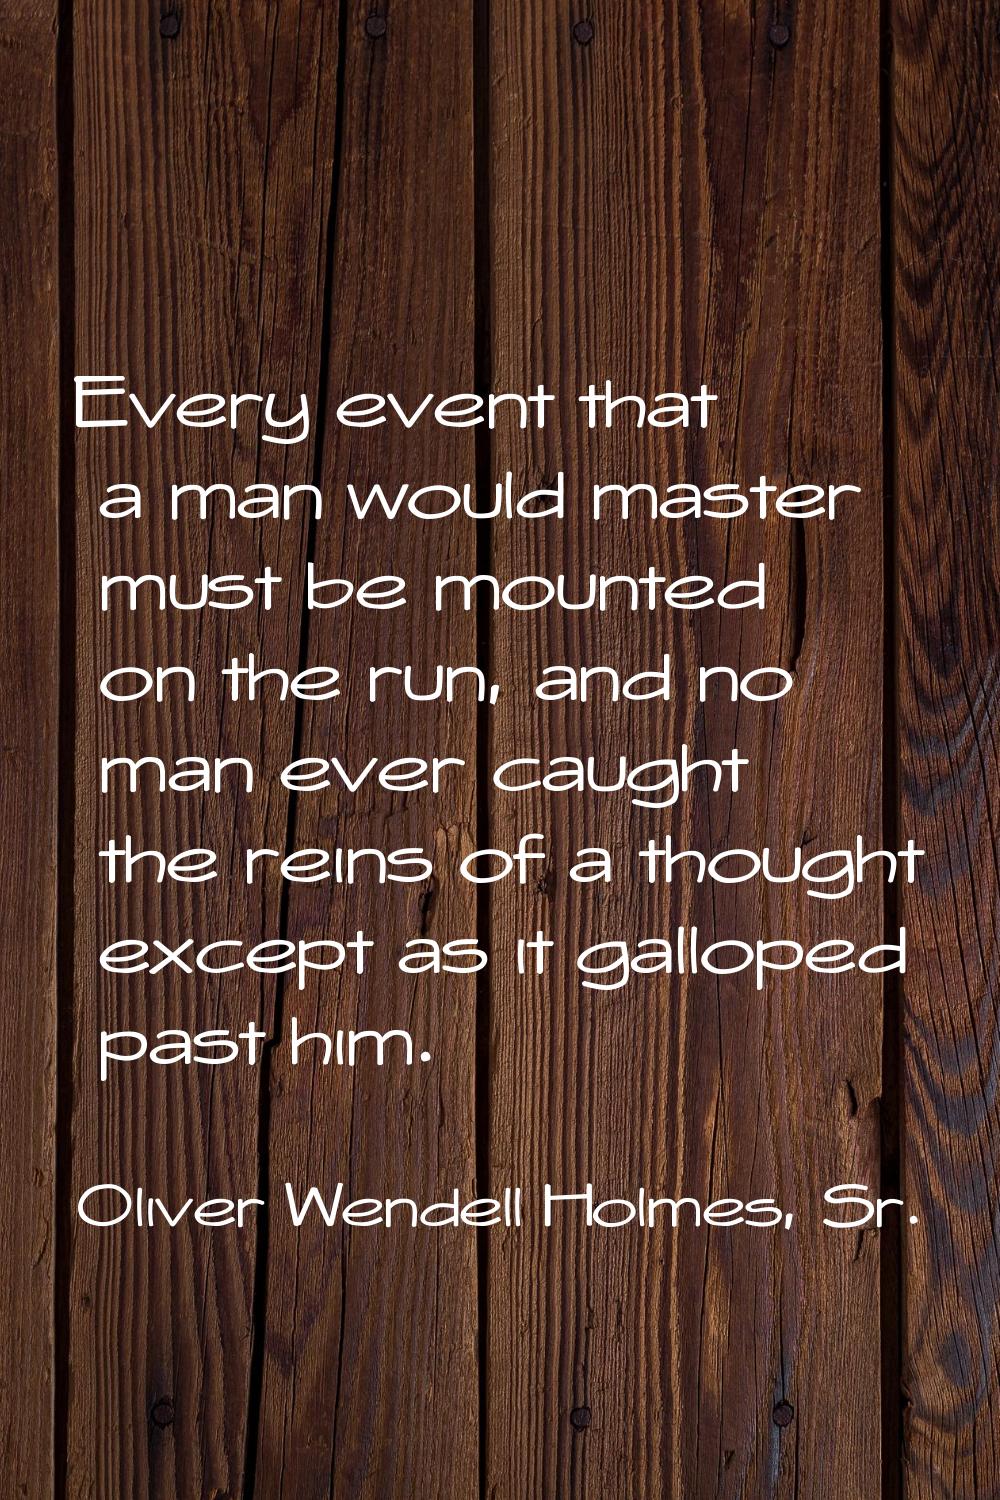 Every event that a man would master must be mounted on the run, and no man ever caught the reins of